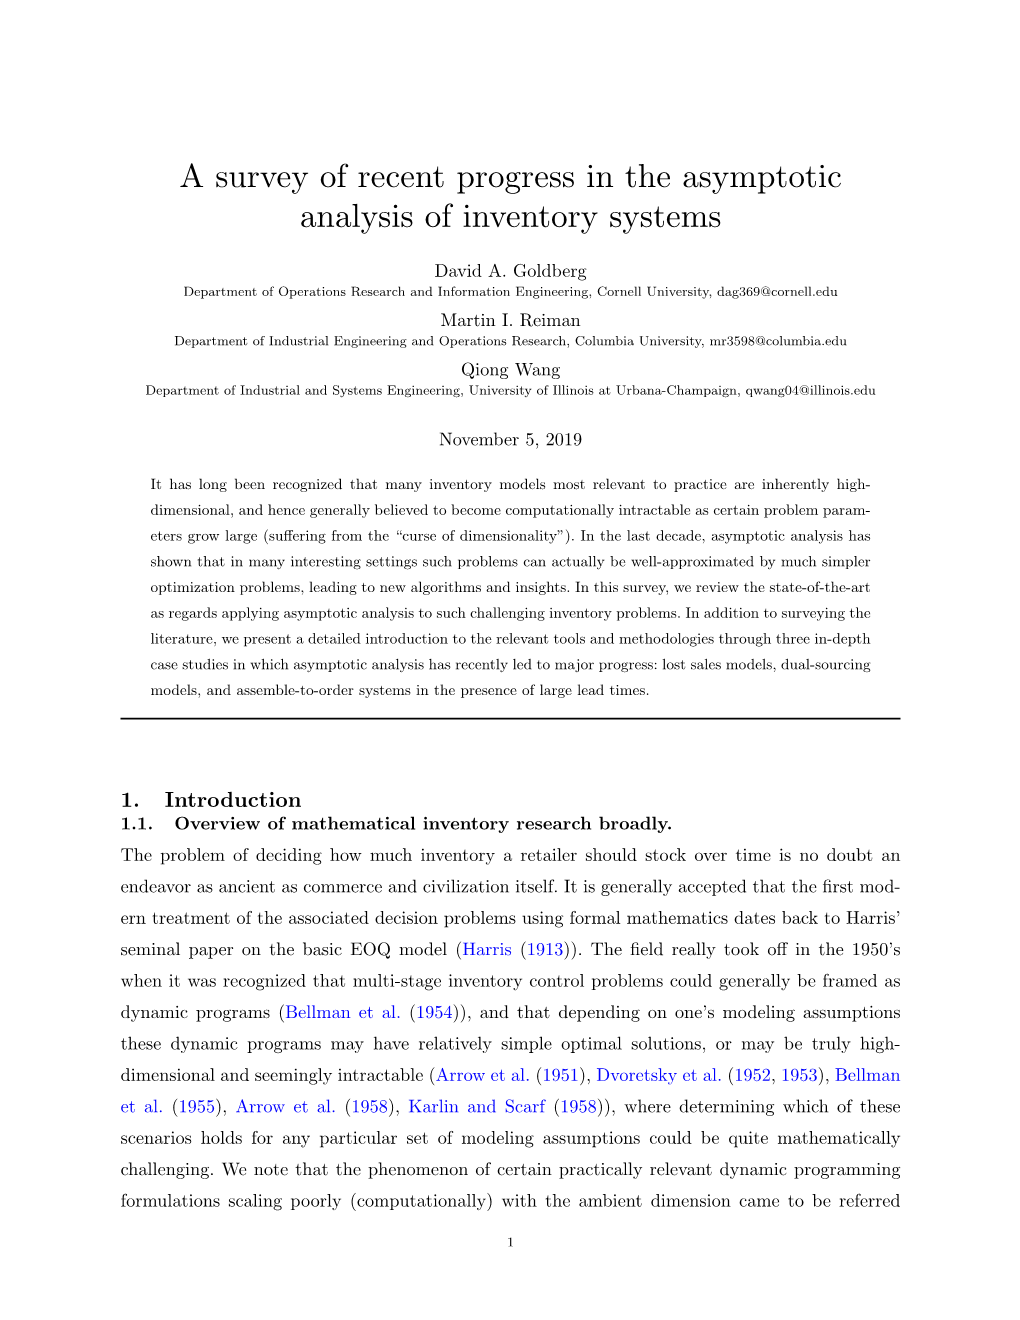 A Survey of Recent Progress in the Asymptotic Analysis of Inventory Systems